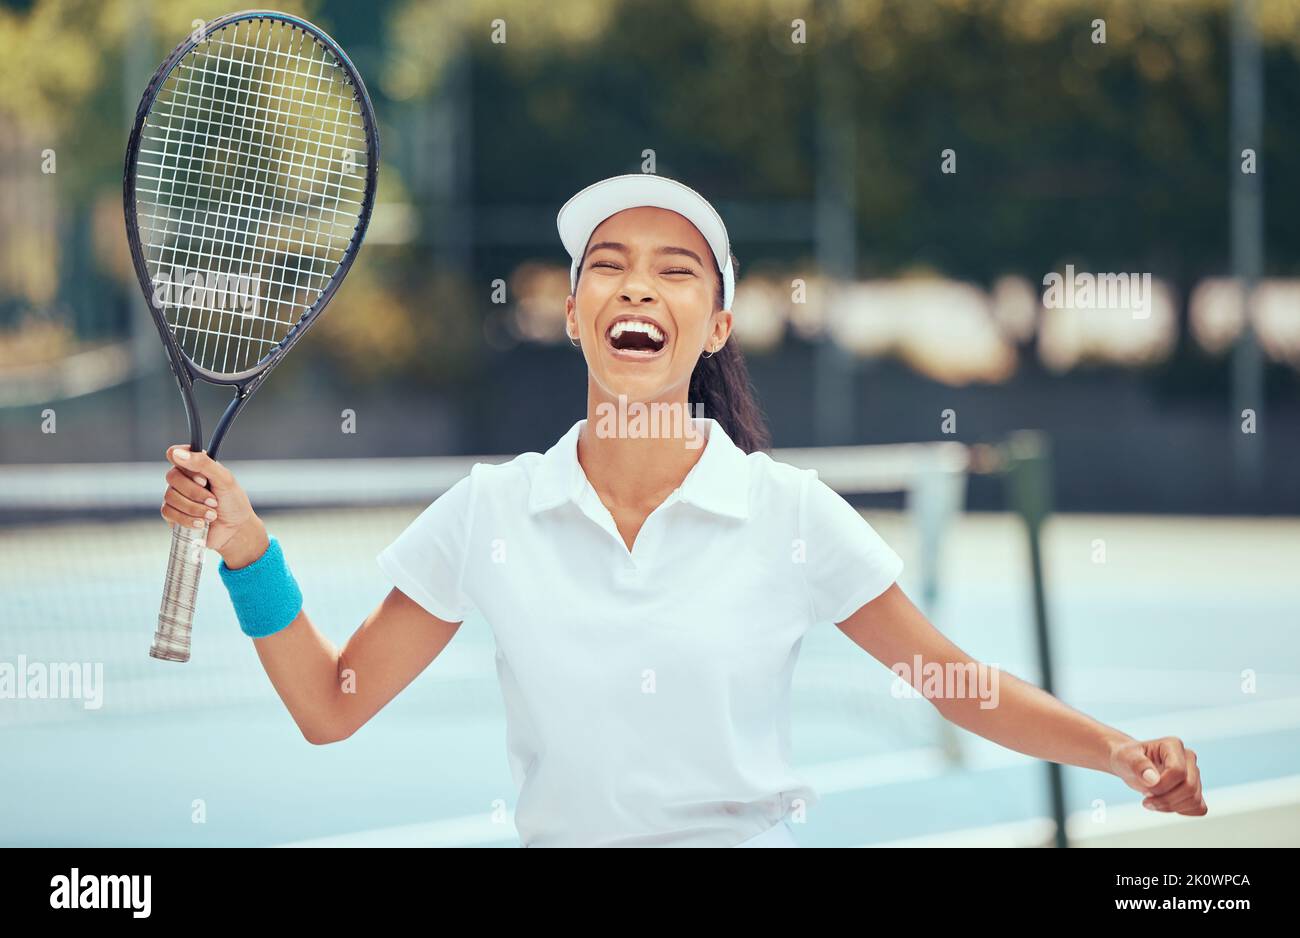 Victory, winner and tennis player woman celebrating with racket after winning a competition or tournament match at an outdoor court. Happy, excited Stock Photo